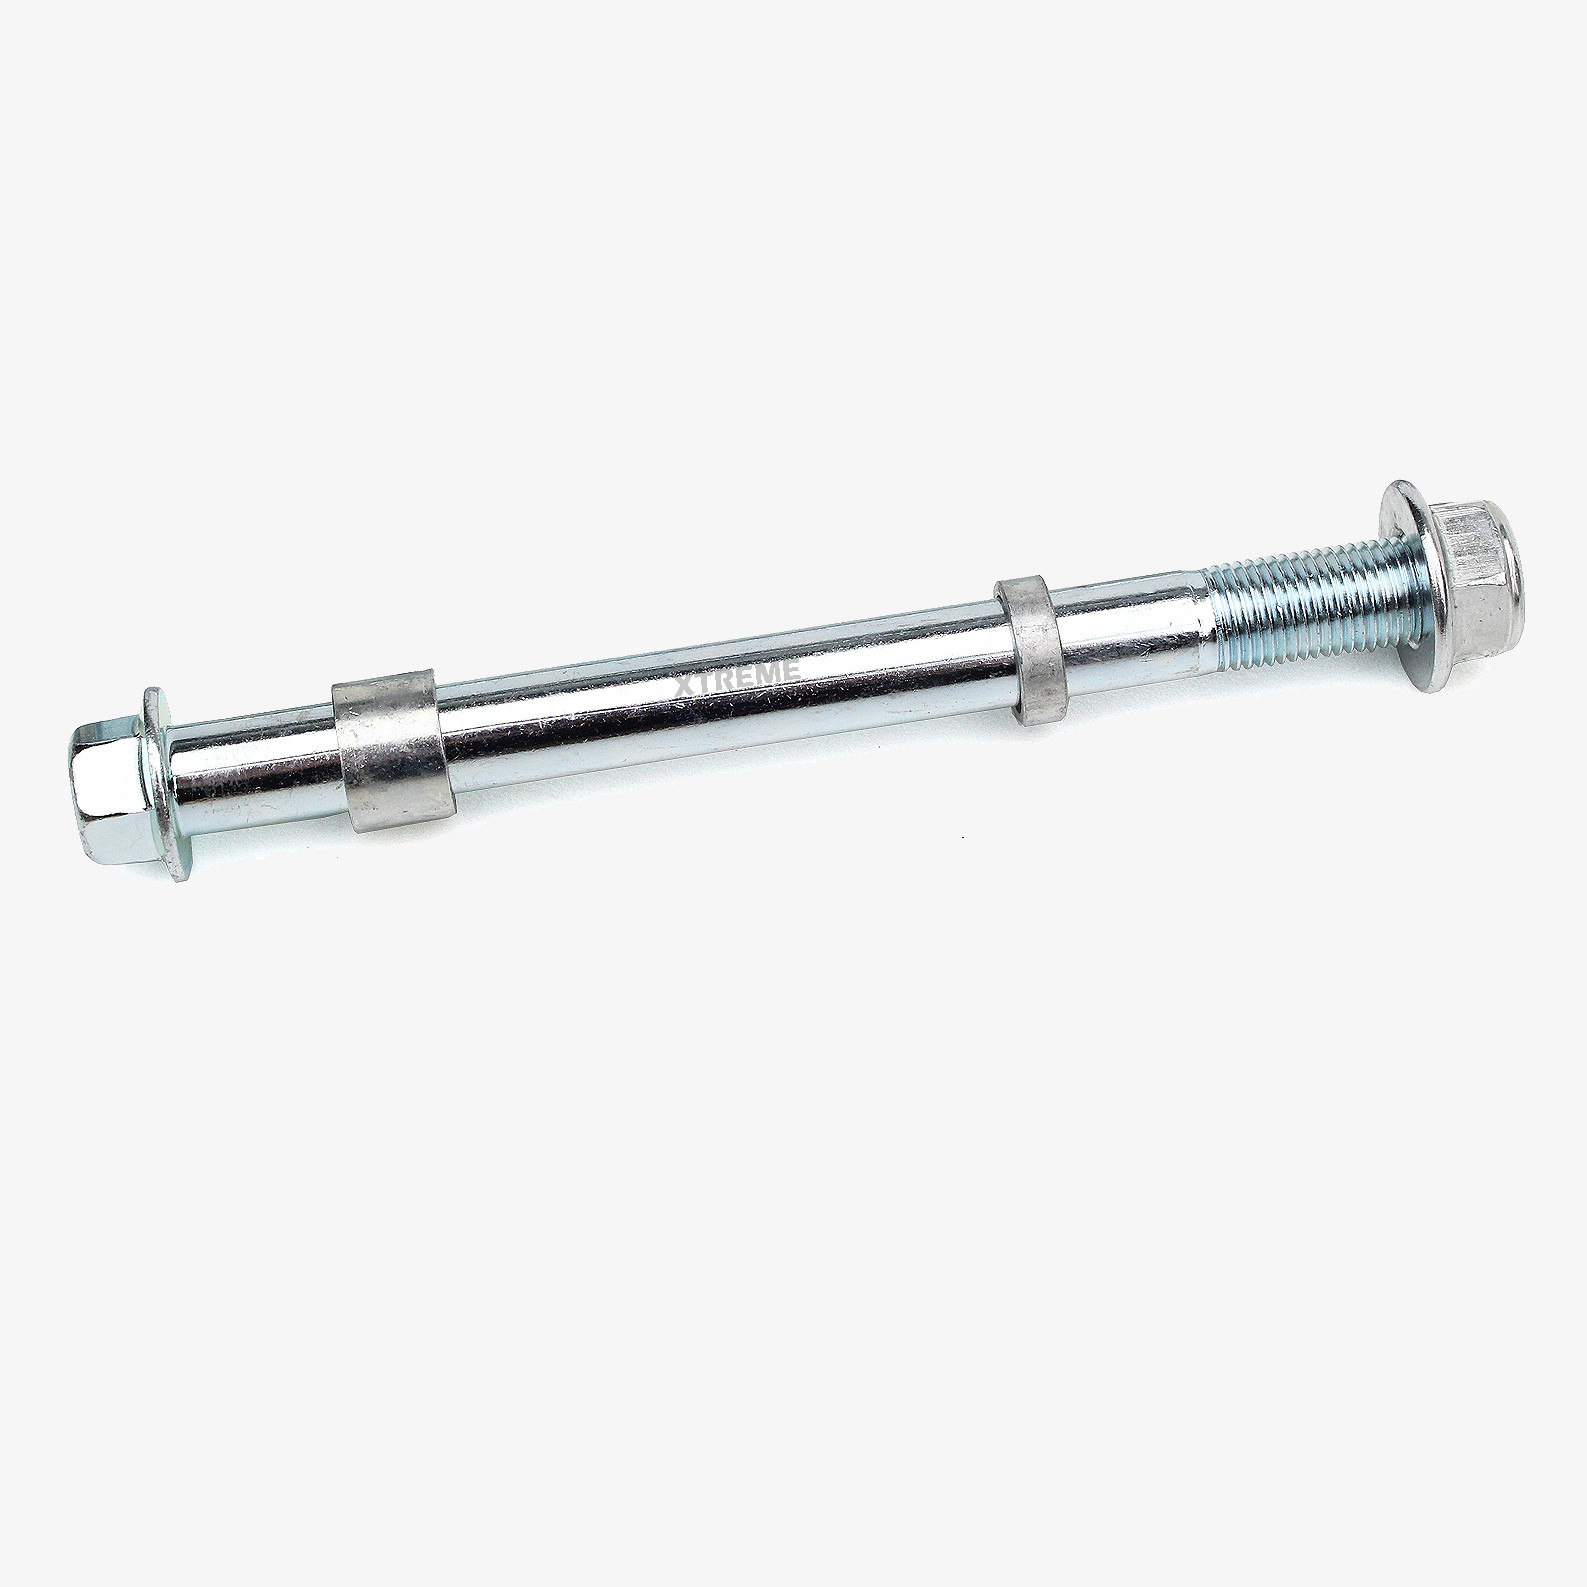 MINI DIRT BIKE 155MM REAR AXLE SPINDLE WITH SPACERS / XTM Pro-Rider